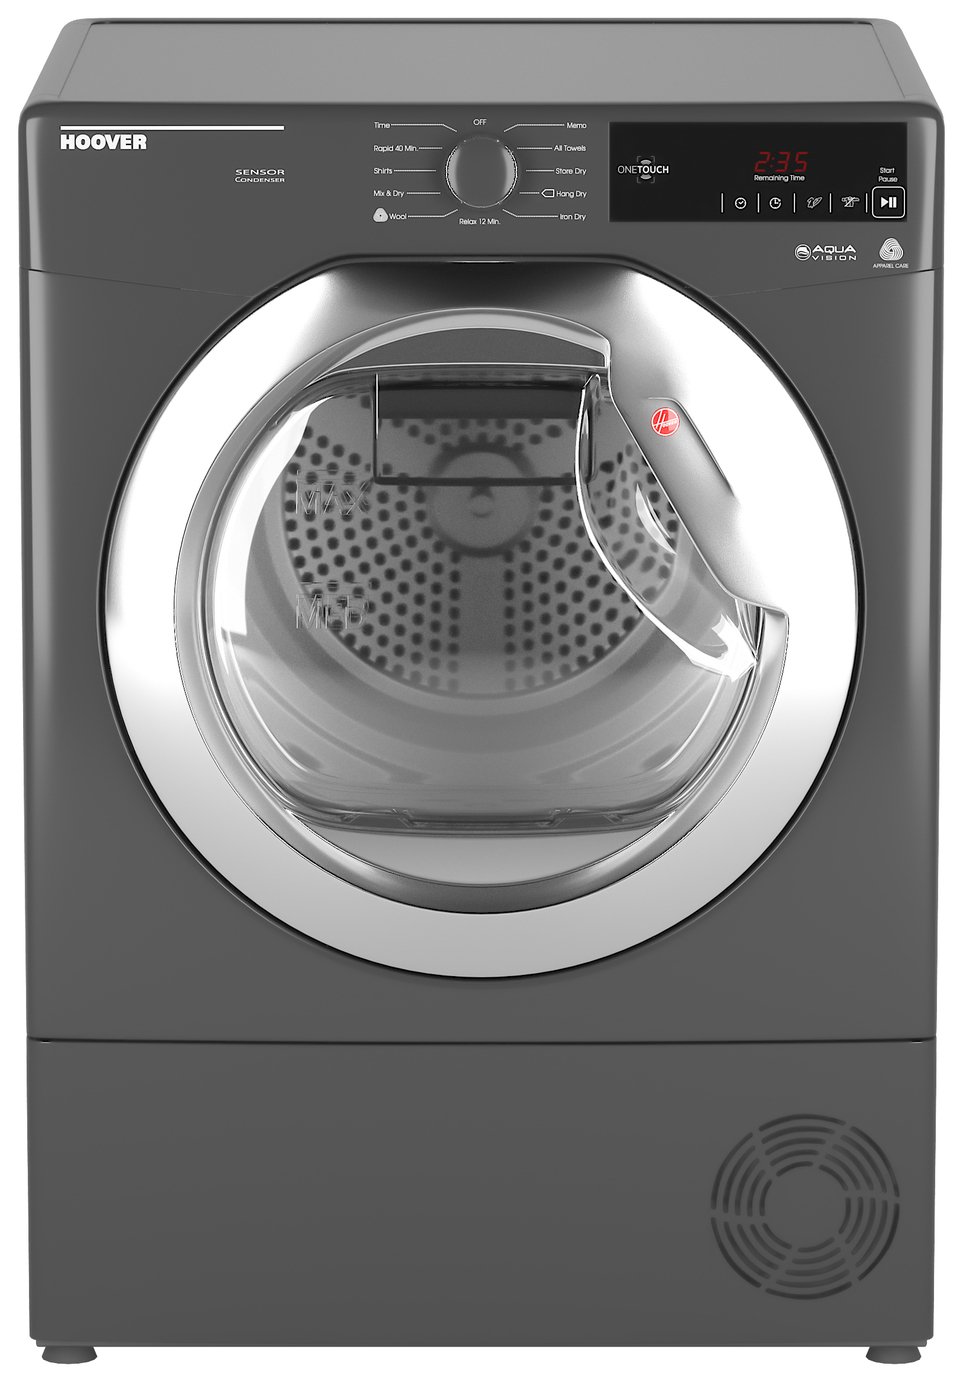 Hoover DXC9TCER 9KG Spin Condenser Tumble Dryer - Graphite